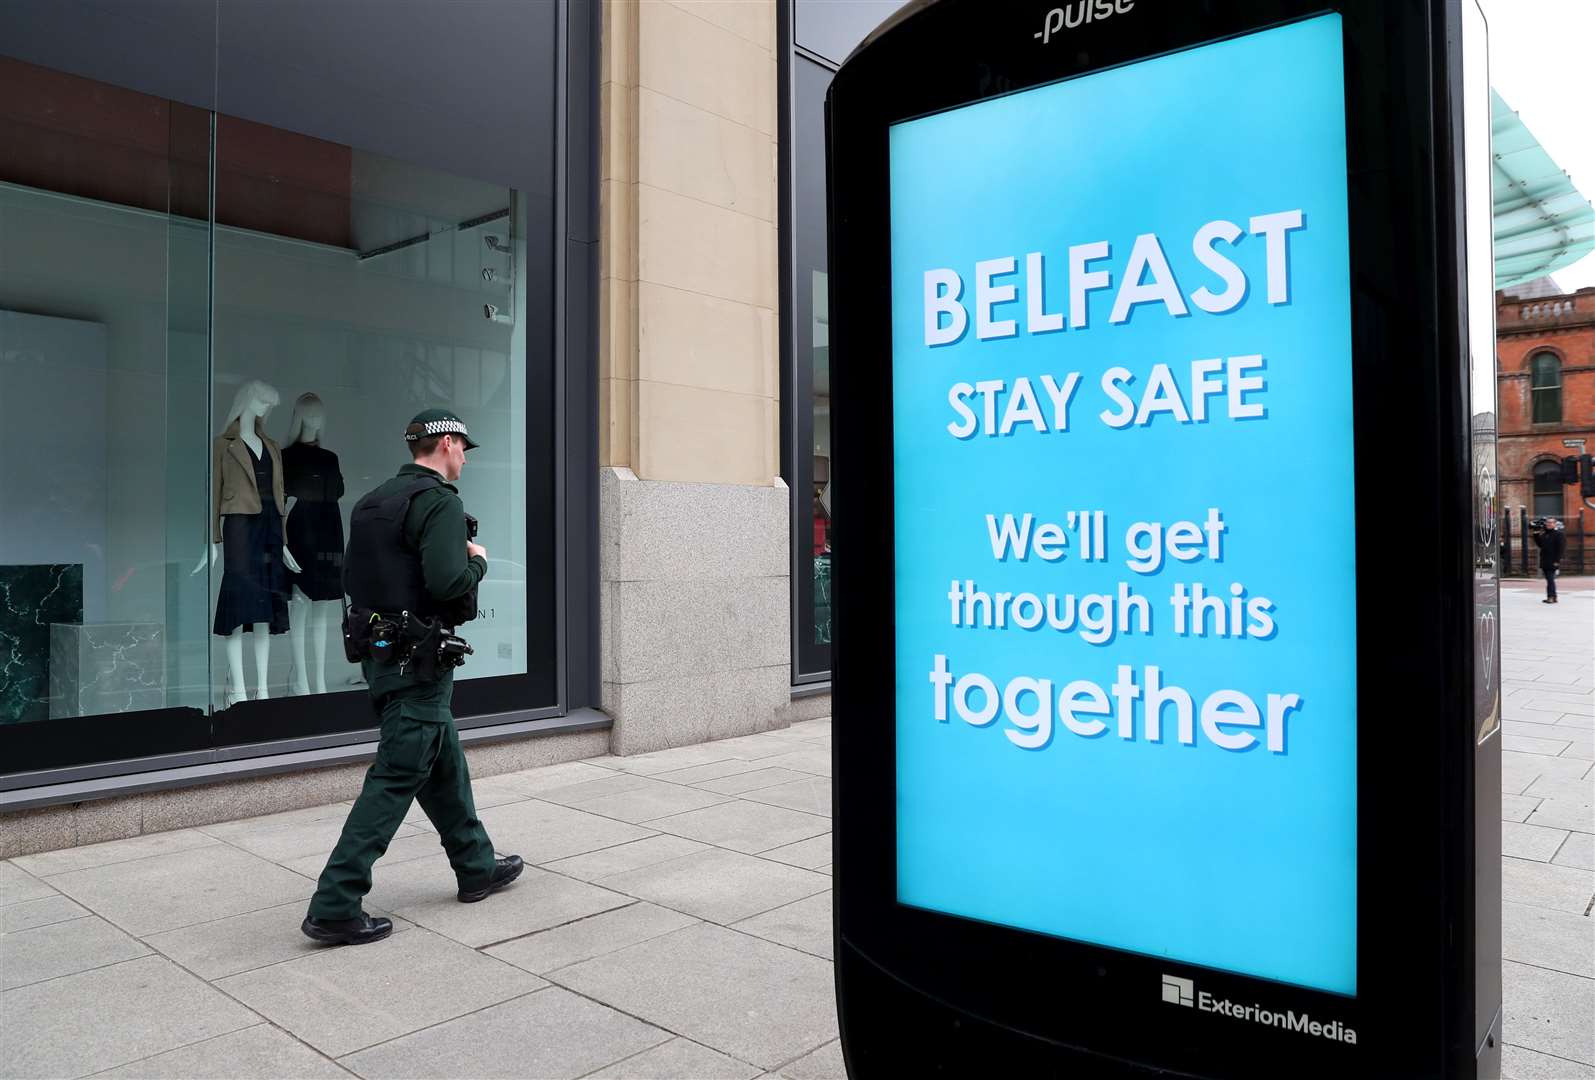 Police have stepped up patrols in Belfast (PSNI/PA)